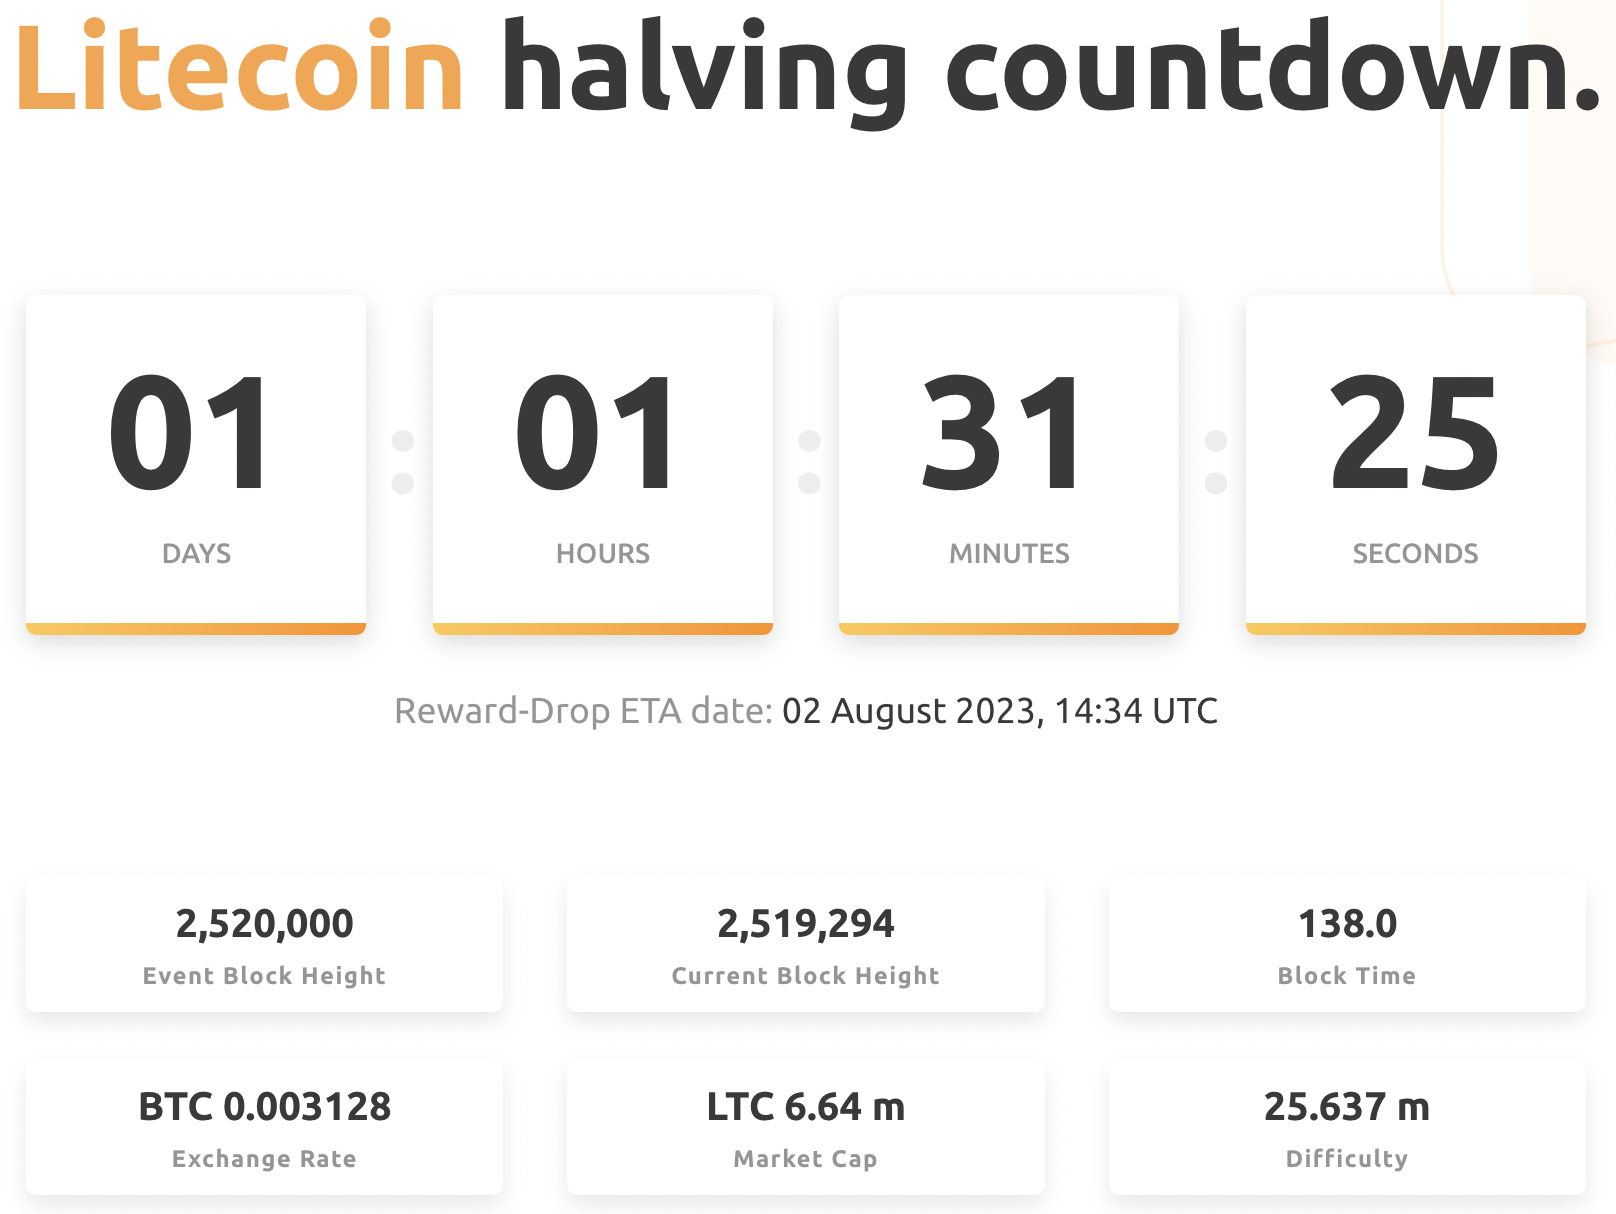 Guest Post by CoinRabbit: What is Litecoin block halving? | CoinMarketCap